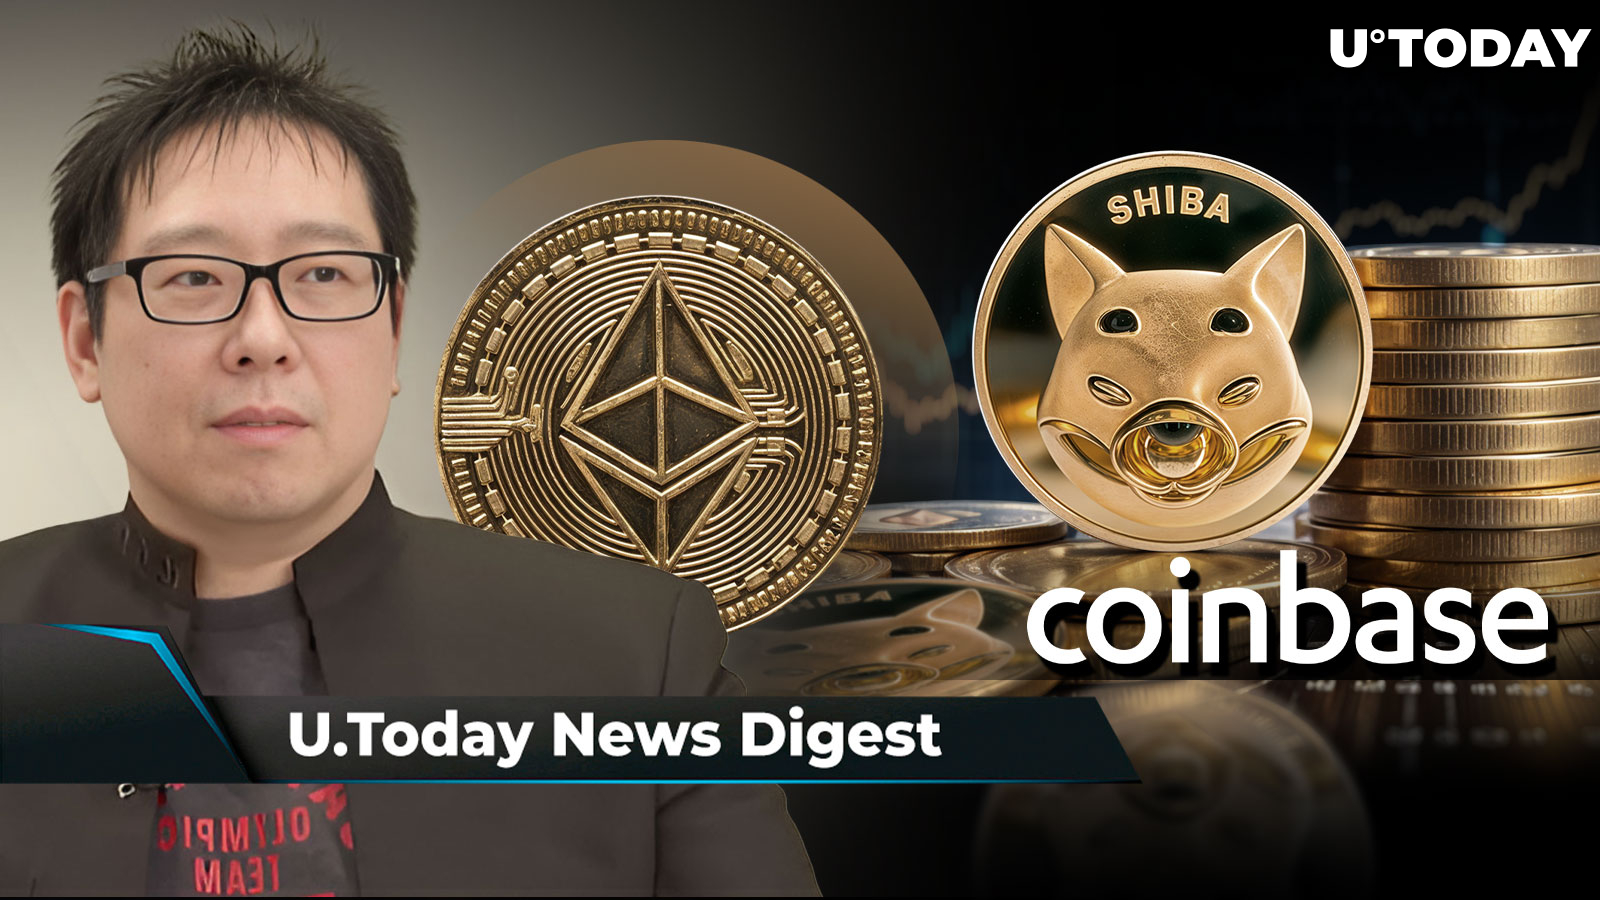 Samson Mow Reveals Last Chance to Sell ETH, Coinbase Adds Perpetual Futures for Shiba Inu, Solana Predicted to Be Next Crypto ETF: Crypto News Digest by U.Today